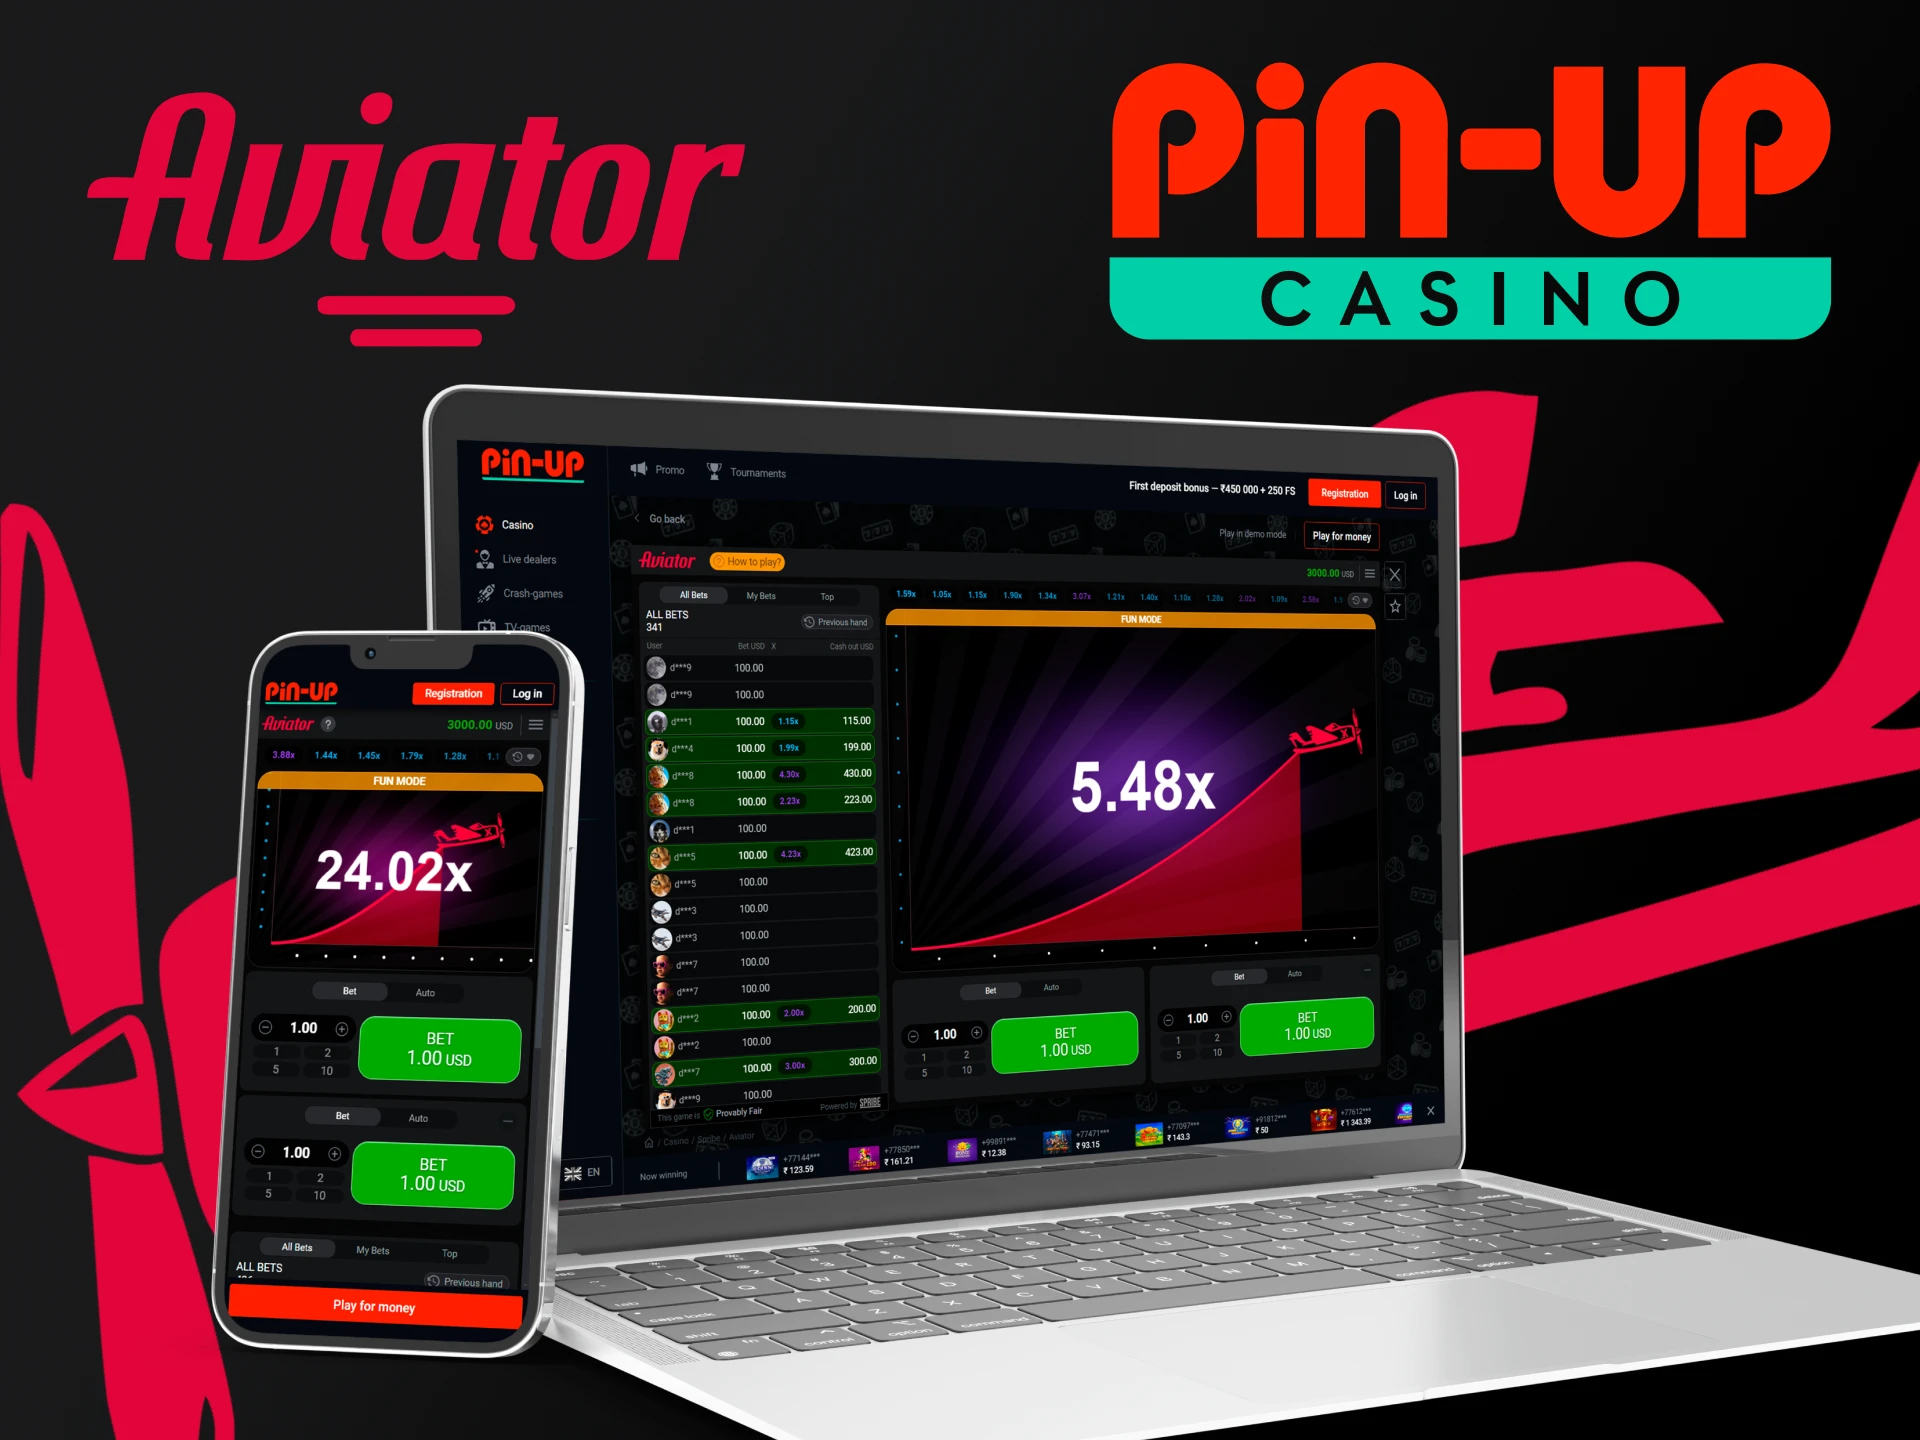 The game Aviator from PinUp can be played both through the application and through the web version of the site.